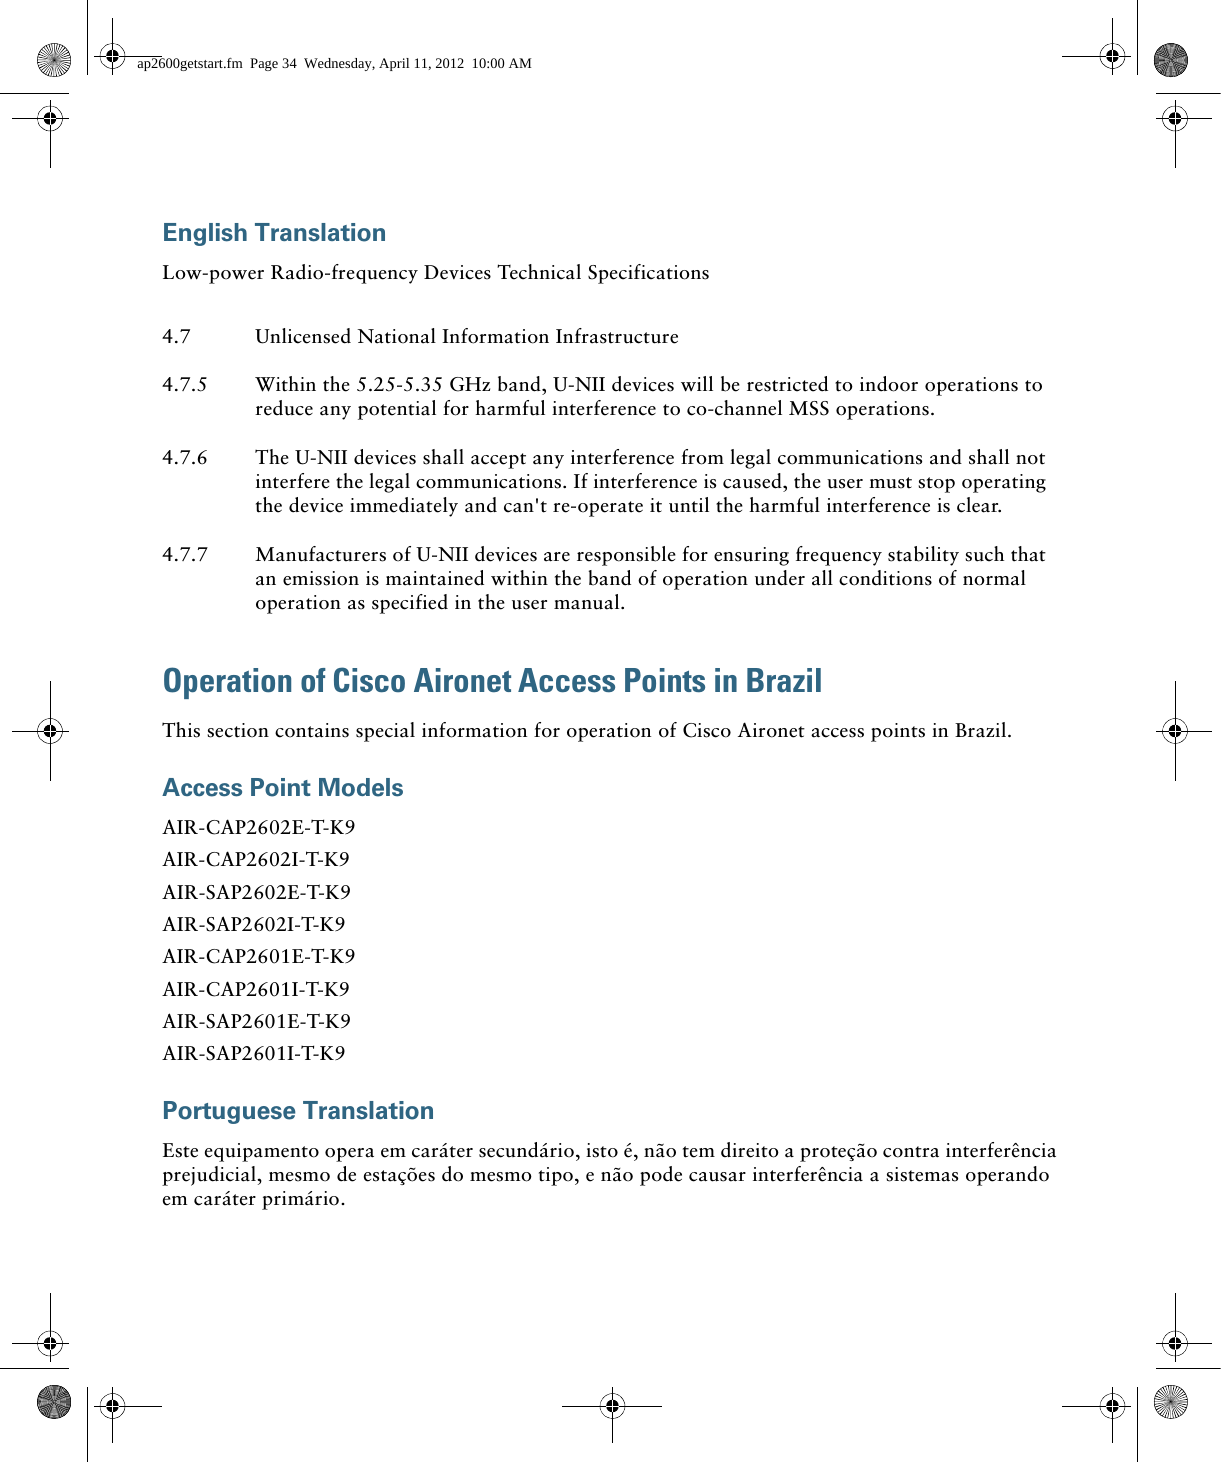  English TranslationLow-power Radio-frequency Devices Technical SpecificationsOperation of Cisco Aironet Access Points in BrazilThis section contains special information for operation of Cisco Aironet access points in Brazil.Access Point ModelsAIR-CAP2602E-T-K9AIR-CAP2602I-T-K9AIR-SAP2602E-T-K9AIR-SAP2602I-T-K9AIR-CAP2601E-T-K9AIR-CAP2601I-T-K9AIR-SAP2601E-T-K9AIR-SAP2601I-T-K9Portuguese TranslationEste equipamento opera em caráter secundário, isto é, não tem direito a proteção contra interferência prejudicial, mesmo de estações do mesmo tipo, e não pode causar interferência a sistemas operando em caráter primário.4.7 Unlicensed National Information Infrastructure4.7.5 Within the 5.25-5.35 GHz band, U-NII devices will be restricted to indoor operations to reduce any potential for harmful interference to co-channel MSS operations.4.7.6 The U-NII devices shall accept any interference from legal communications and shall not interfere the legal communications. If interference is caused, the user must stop operating the device immediately and can&apos;t re-operate it until the harmful interference is clear.4.7.7 Manufacturers of U-NII devices are responsible for ensuring frequency stability such that an emission is maintained within the band of operation under all conditions of normal operation as specified in the user manual.ap2600getstart.fm  Page 34  Wednesday, April 11, 2012  10:00 AM